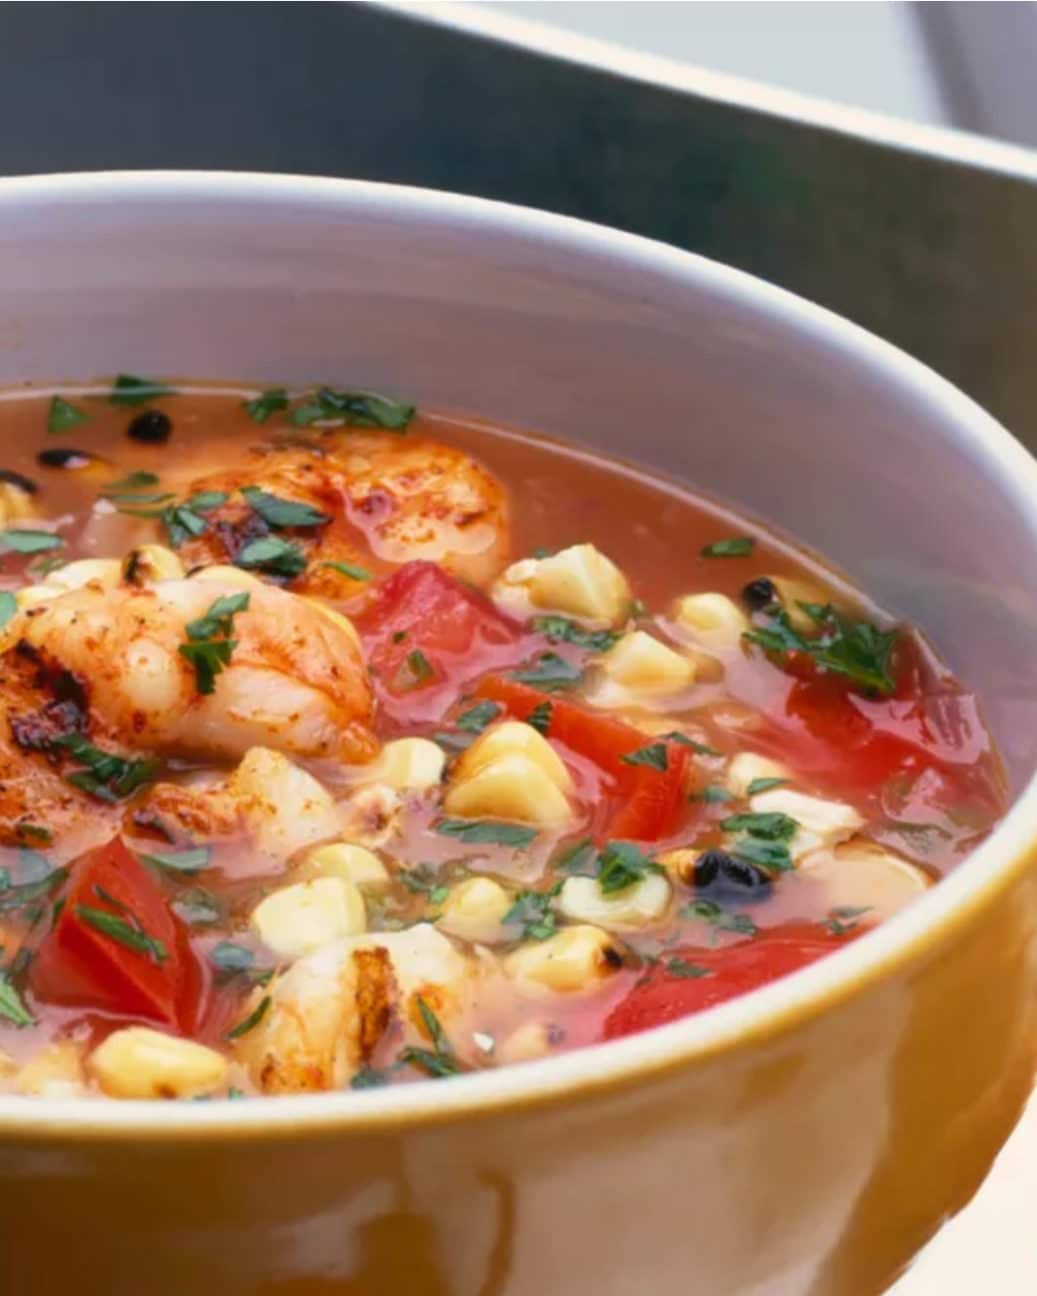 Healthy Soup Recipes: 19 Light Soups to Help You Lose Weight